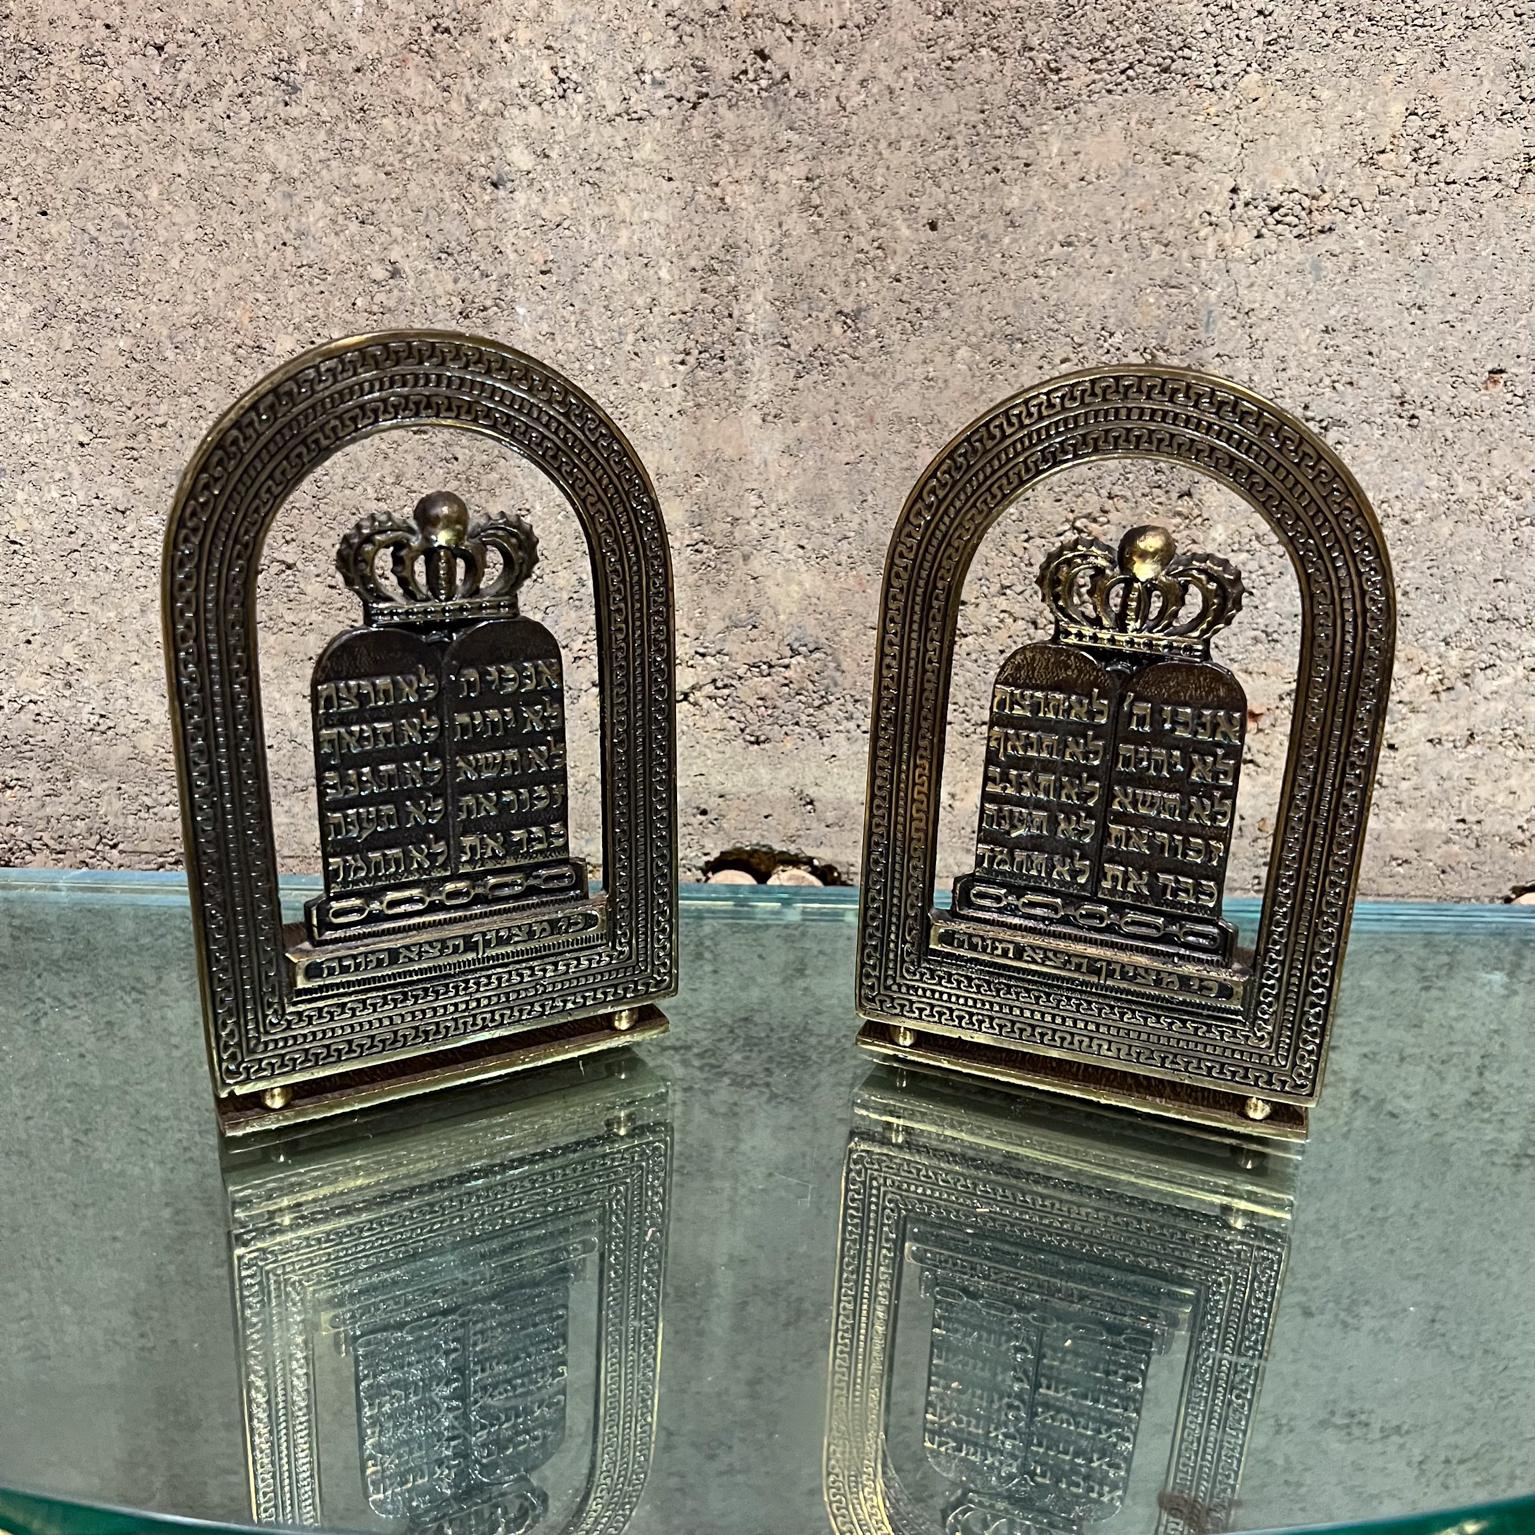 Vintage Jewish Hebrew Brass Bookends Israel
Decorative Metal
3.5 diameter x 7 h x 4.25 w
Made in Israel
Original Vintage Condition Unrestored
Refer to images provided.